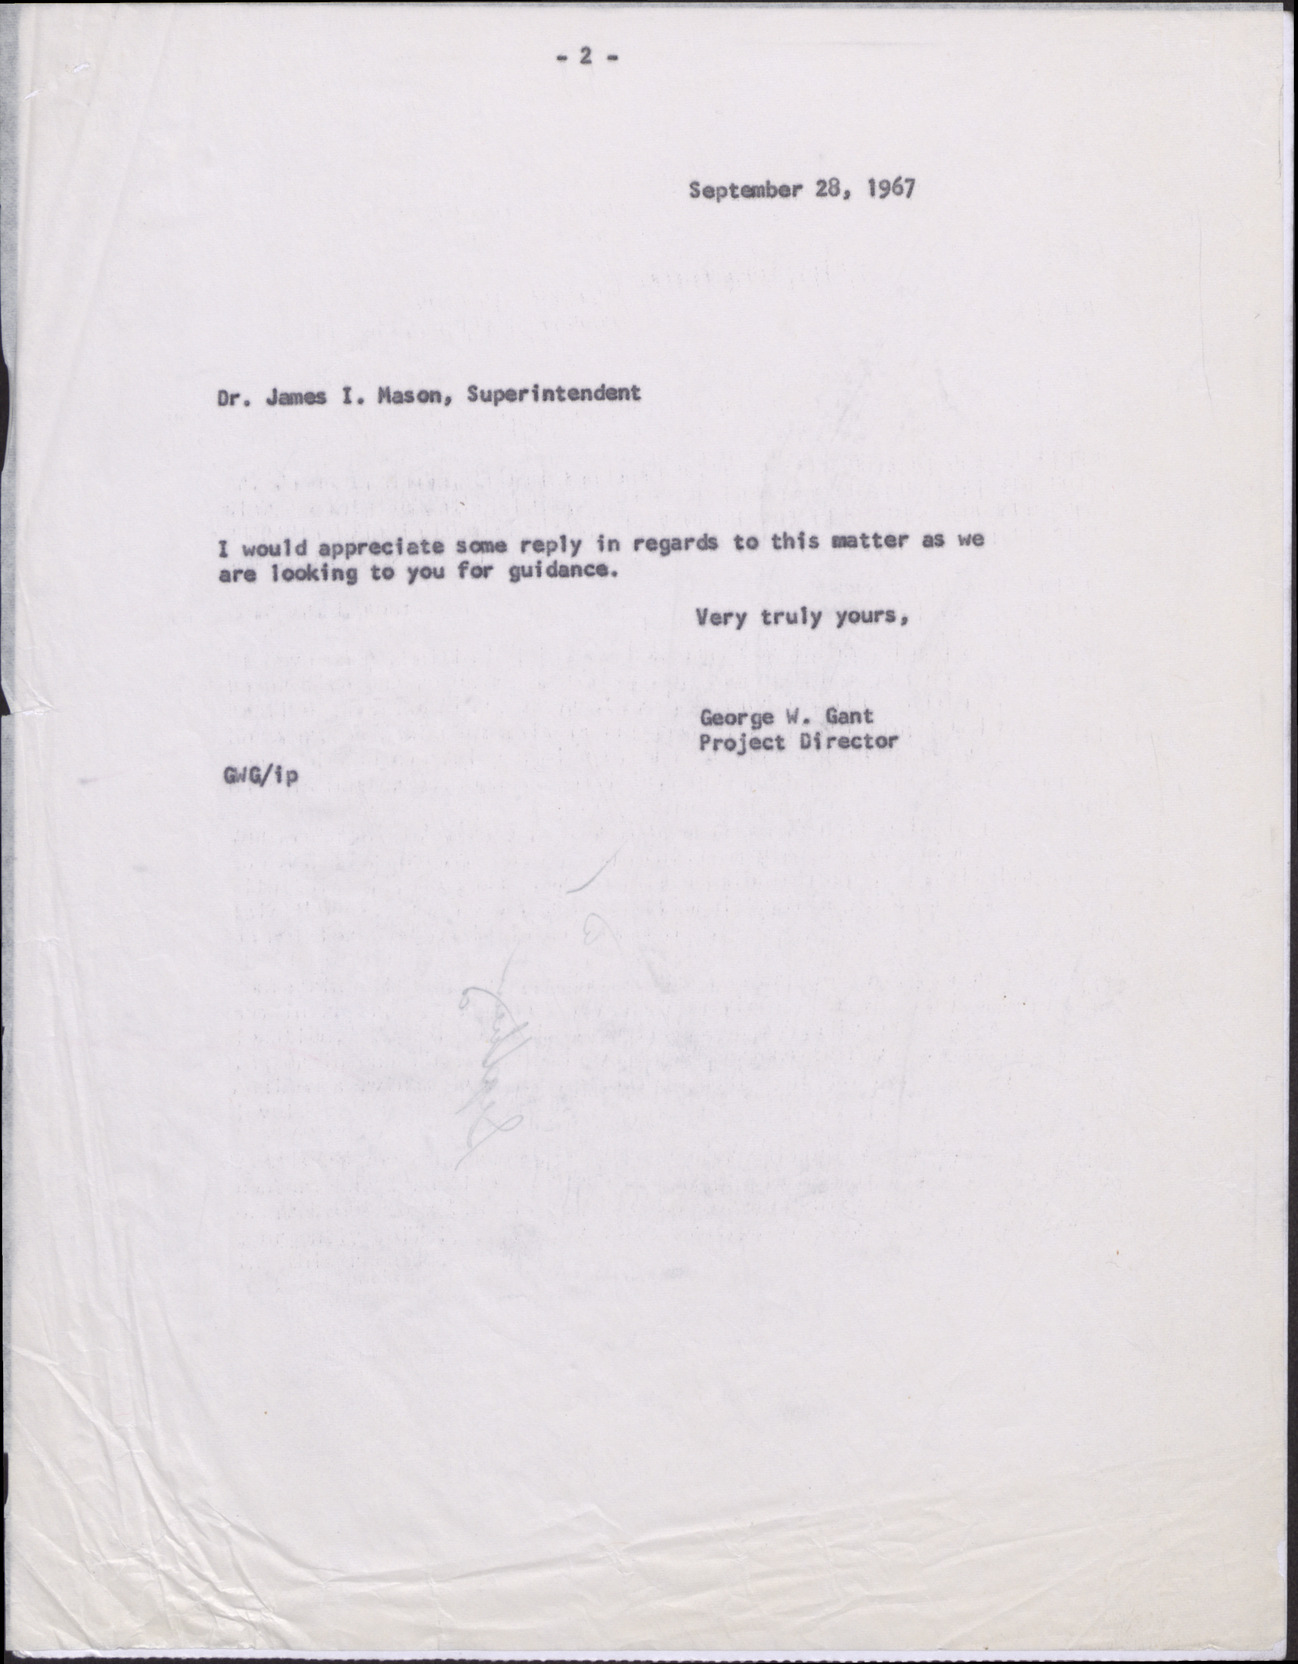 Letter to James I. Mason from George W. Gant (2 pages), September 28, 1967, page 2